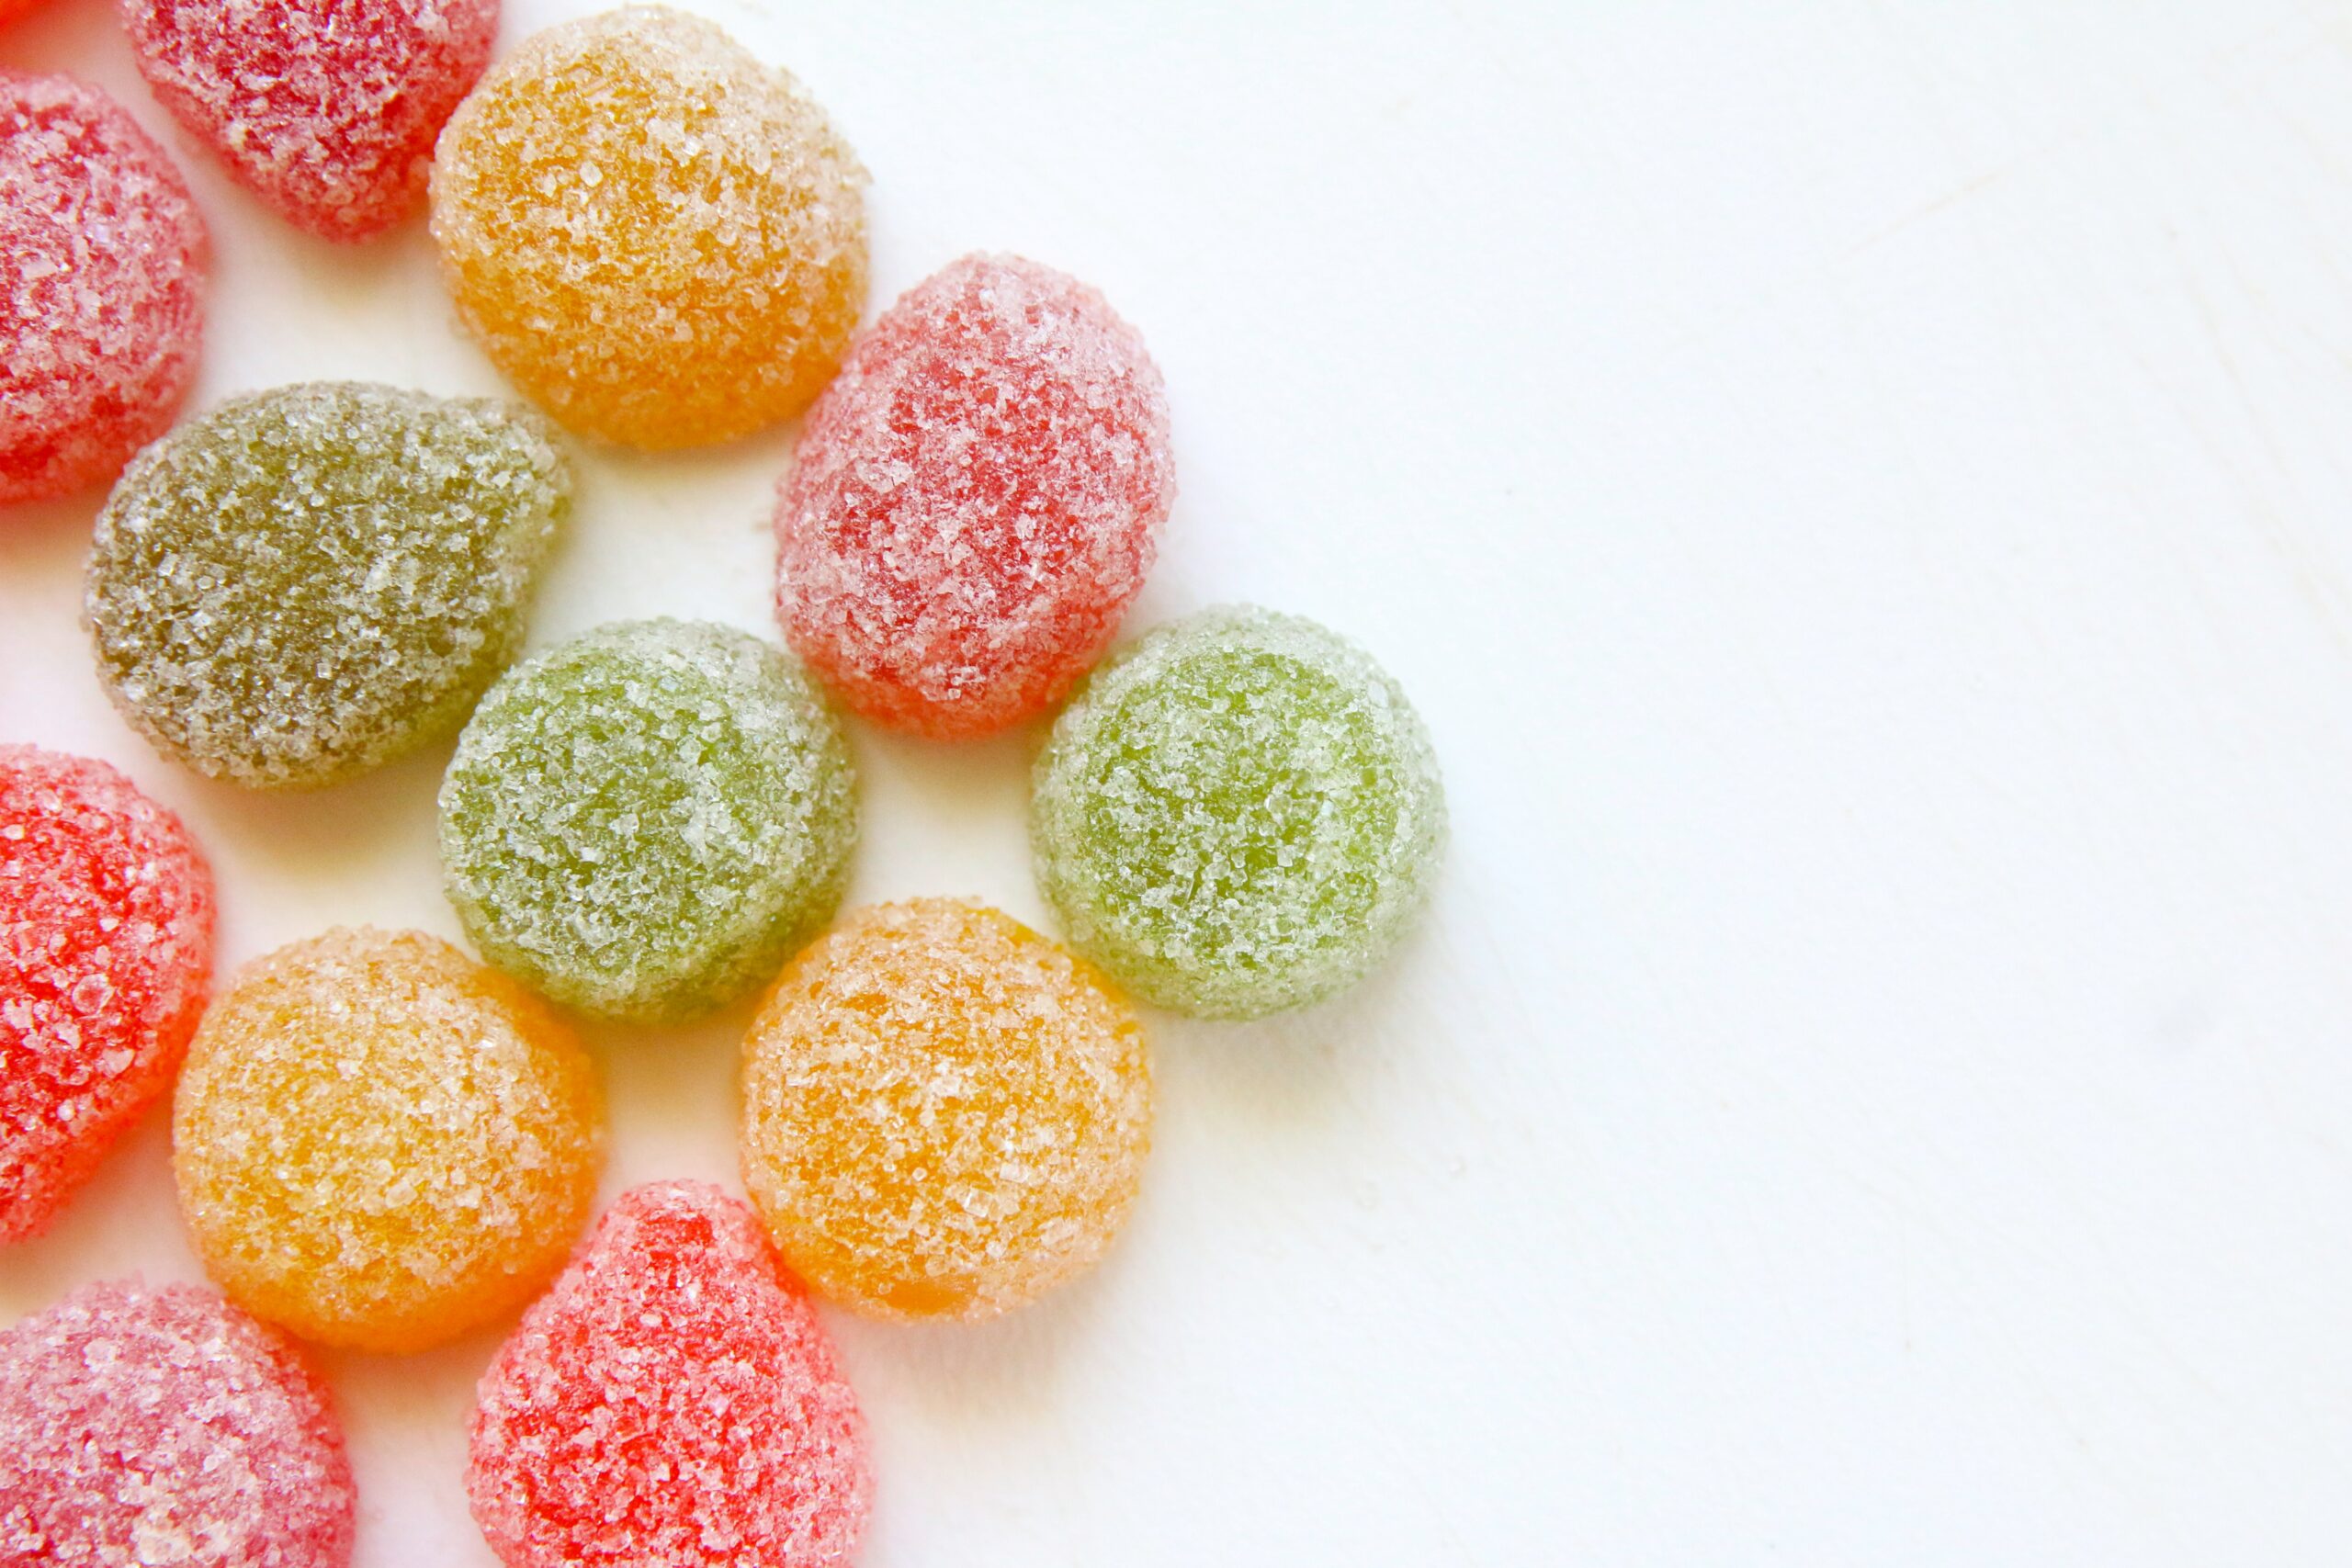 Why don’t fake flavors taste like real fruit?